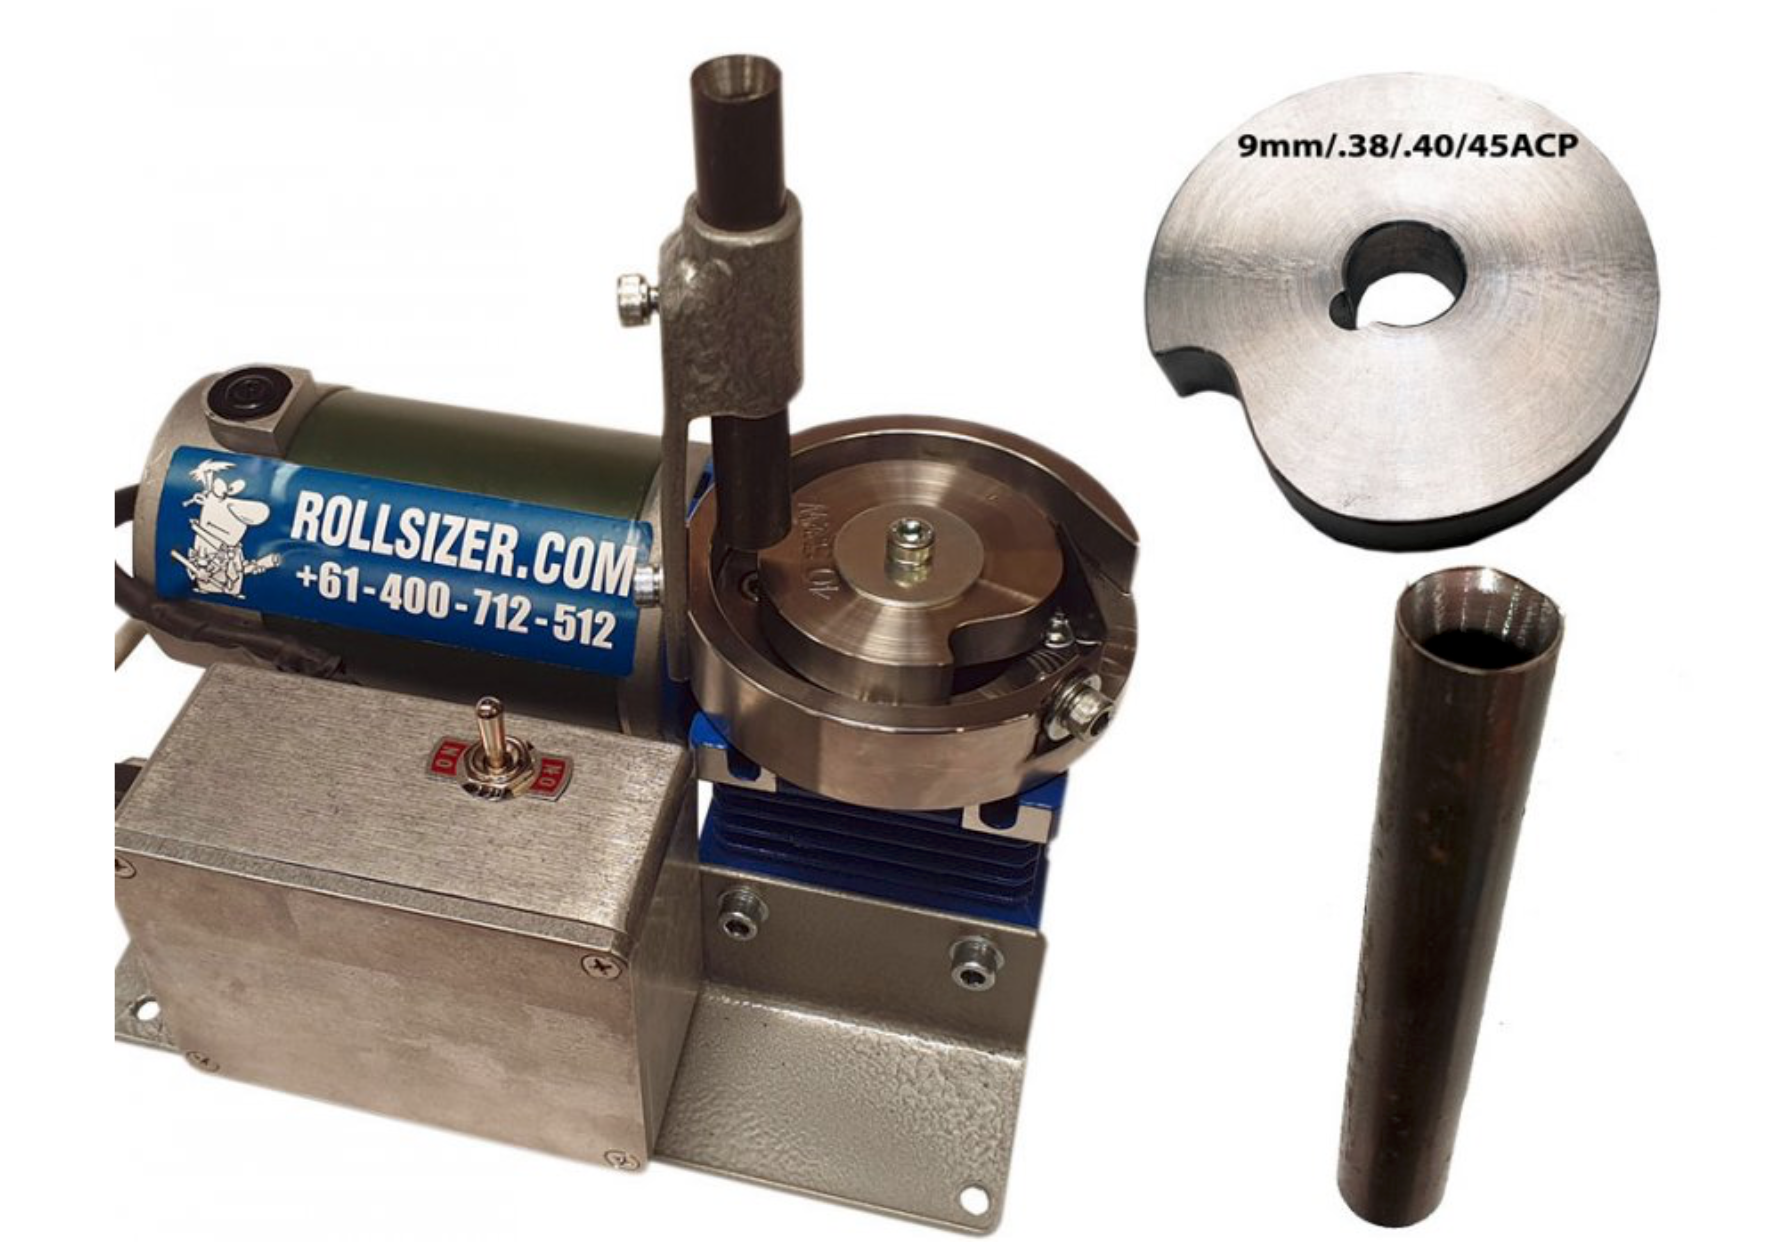 Rollsizer - Complete DC Drive Mini Roll Sizer with Caliber discs and Drop Tube